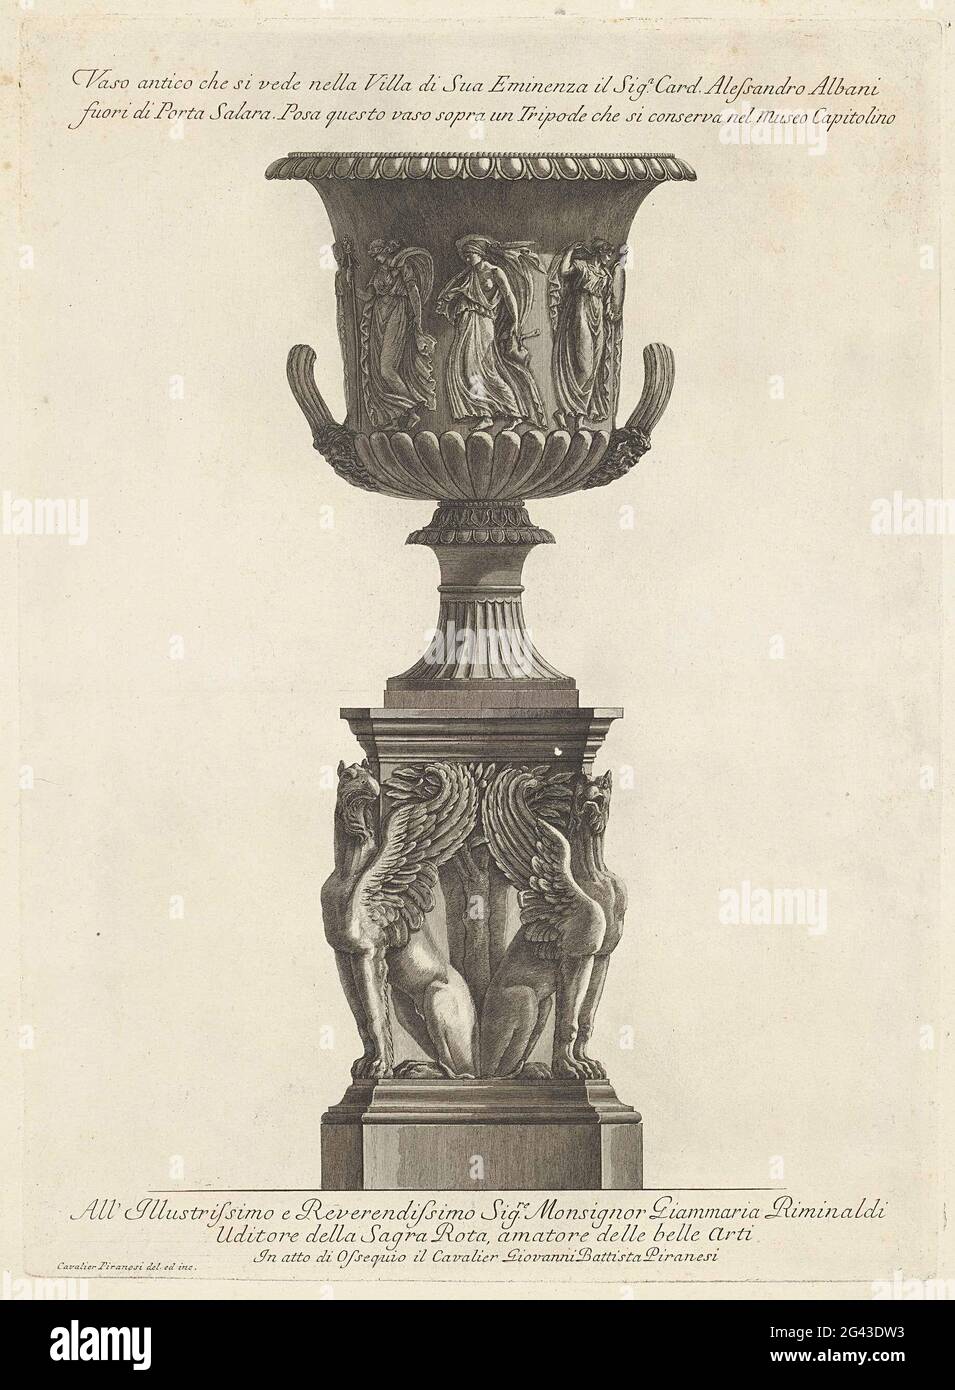 Piranesi Vase High Resolution Stock Photography and Images - Alamy